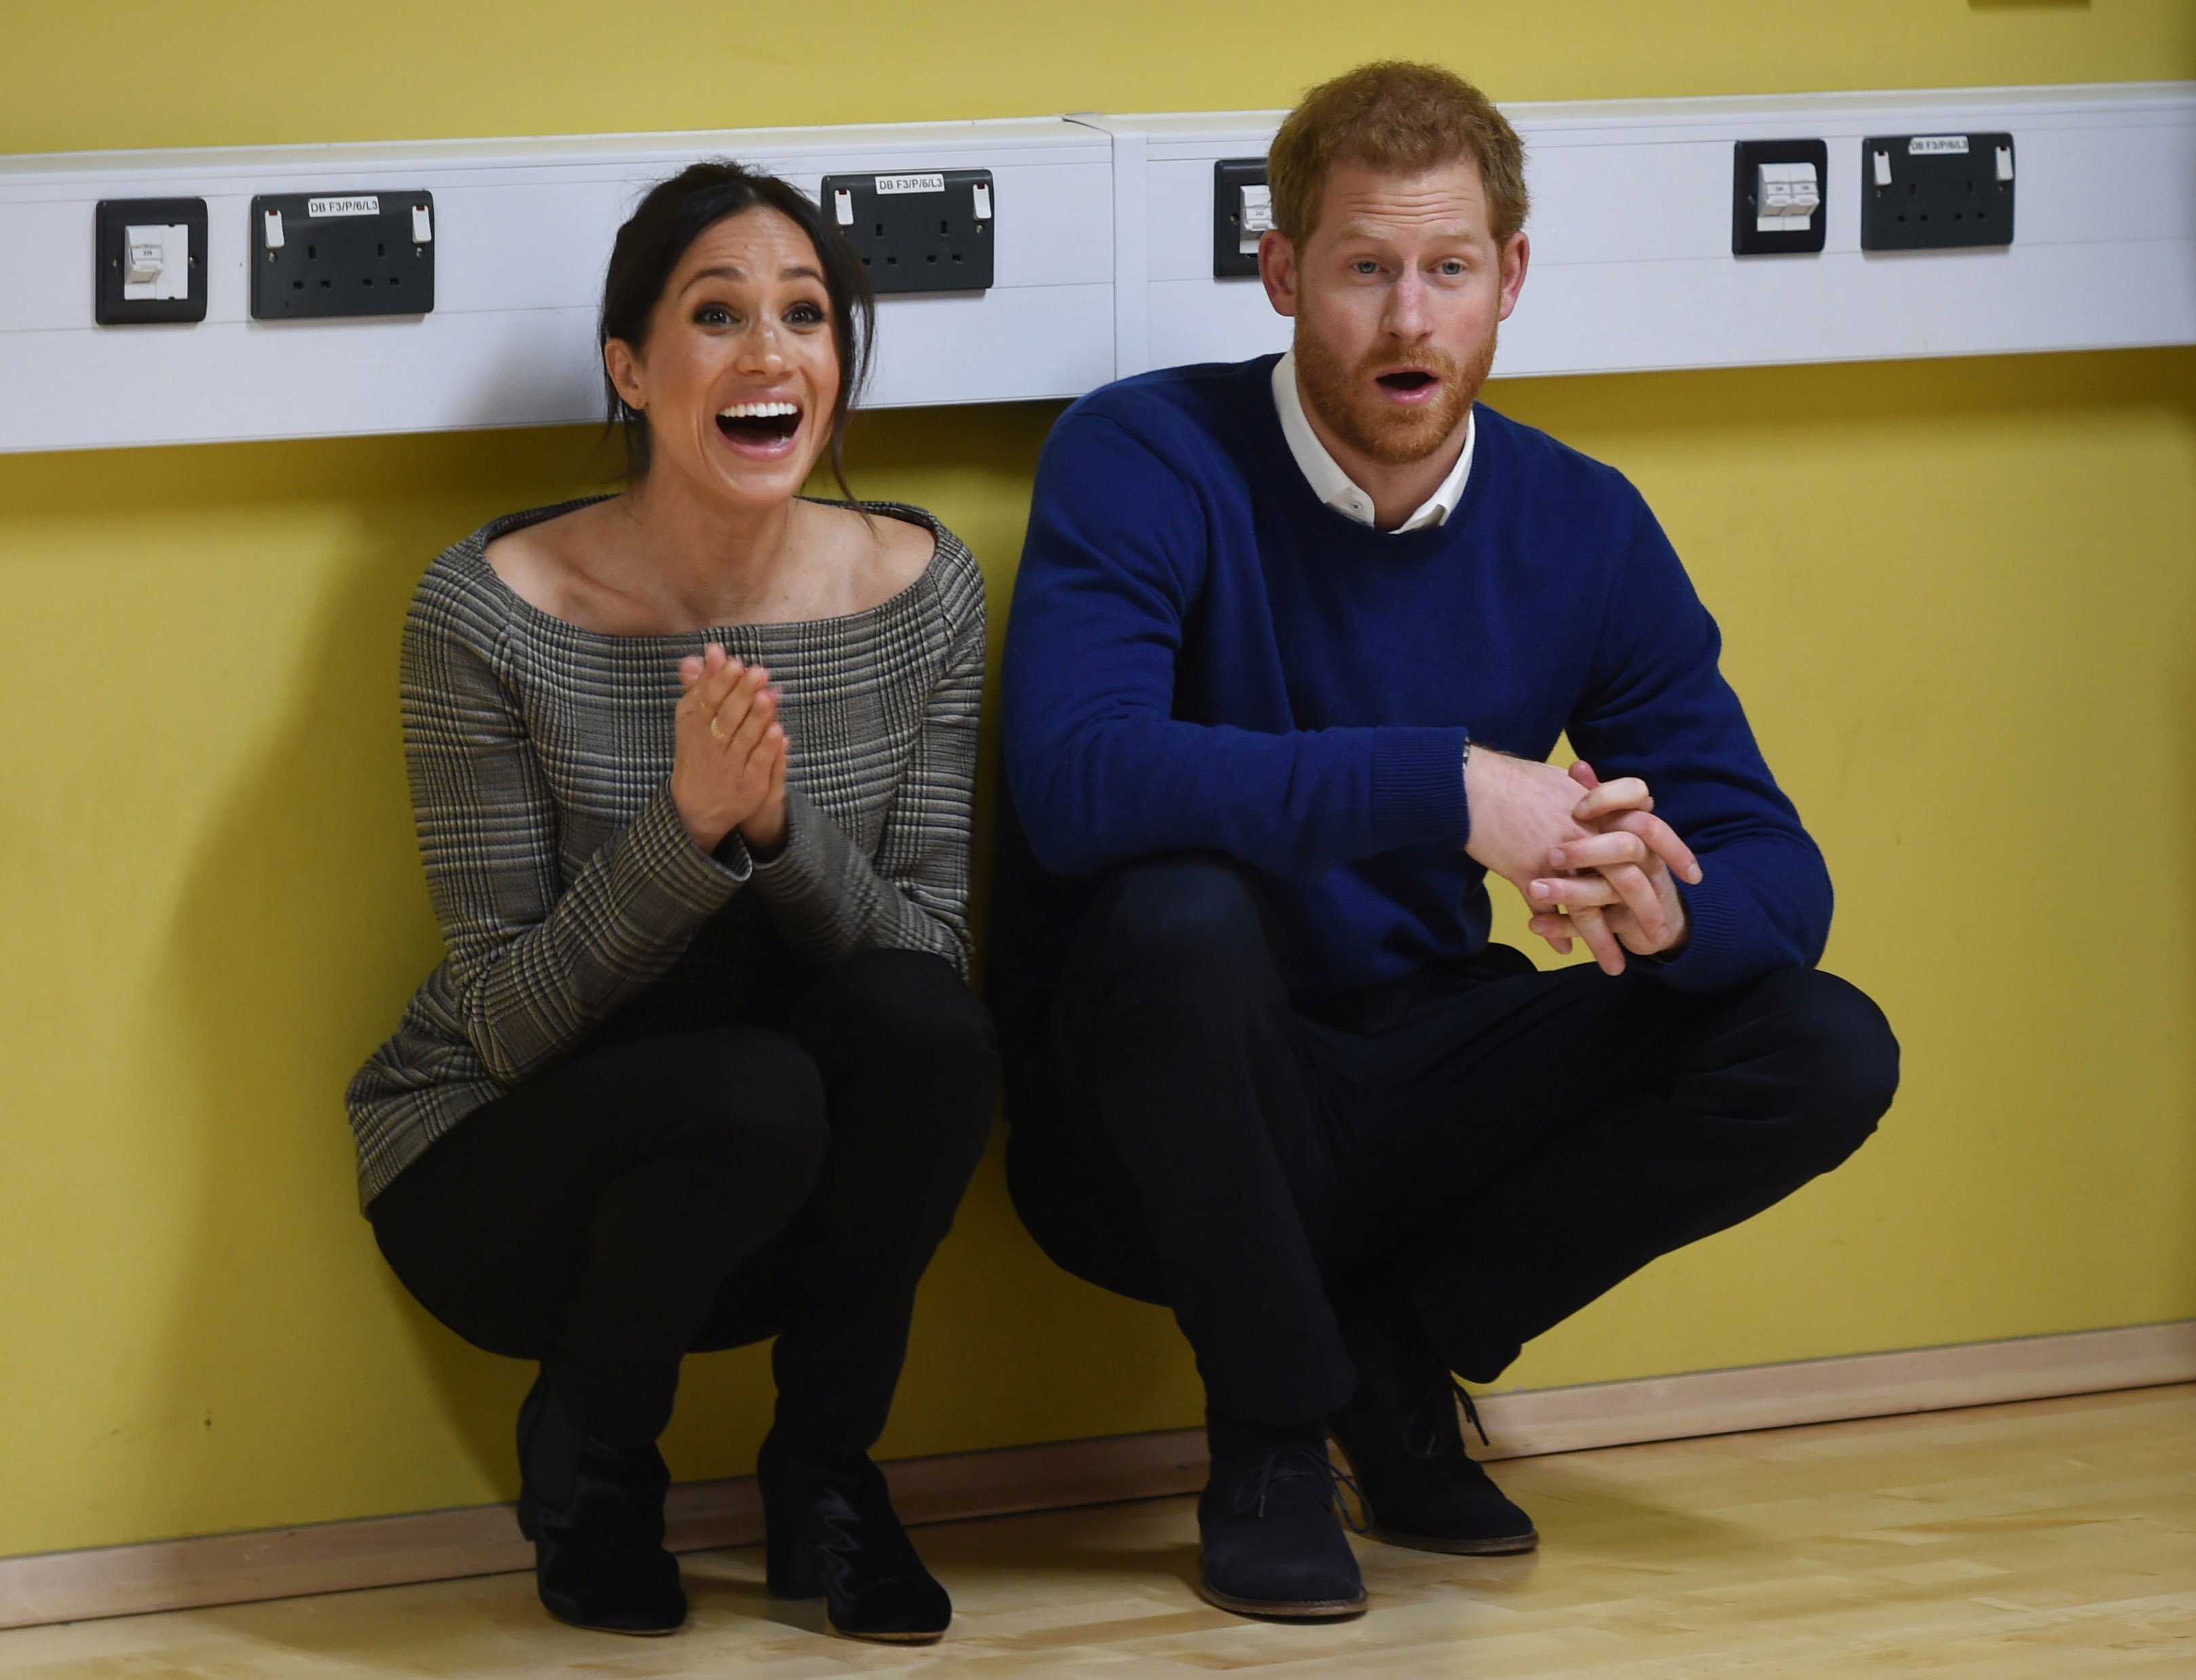 Prince Harry and his fiancee Meghan Markle attend a street dance class on January 18, 2018 in Cardiff, Wales. | Source Getty Images